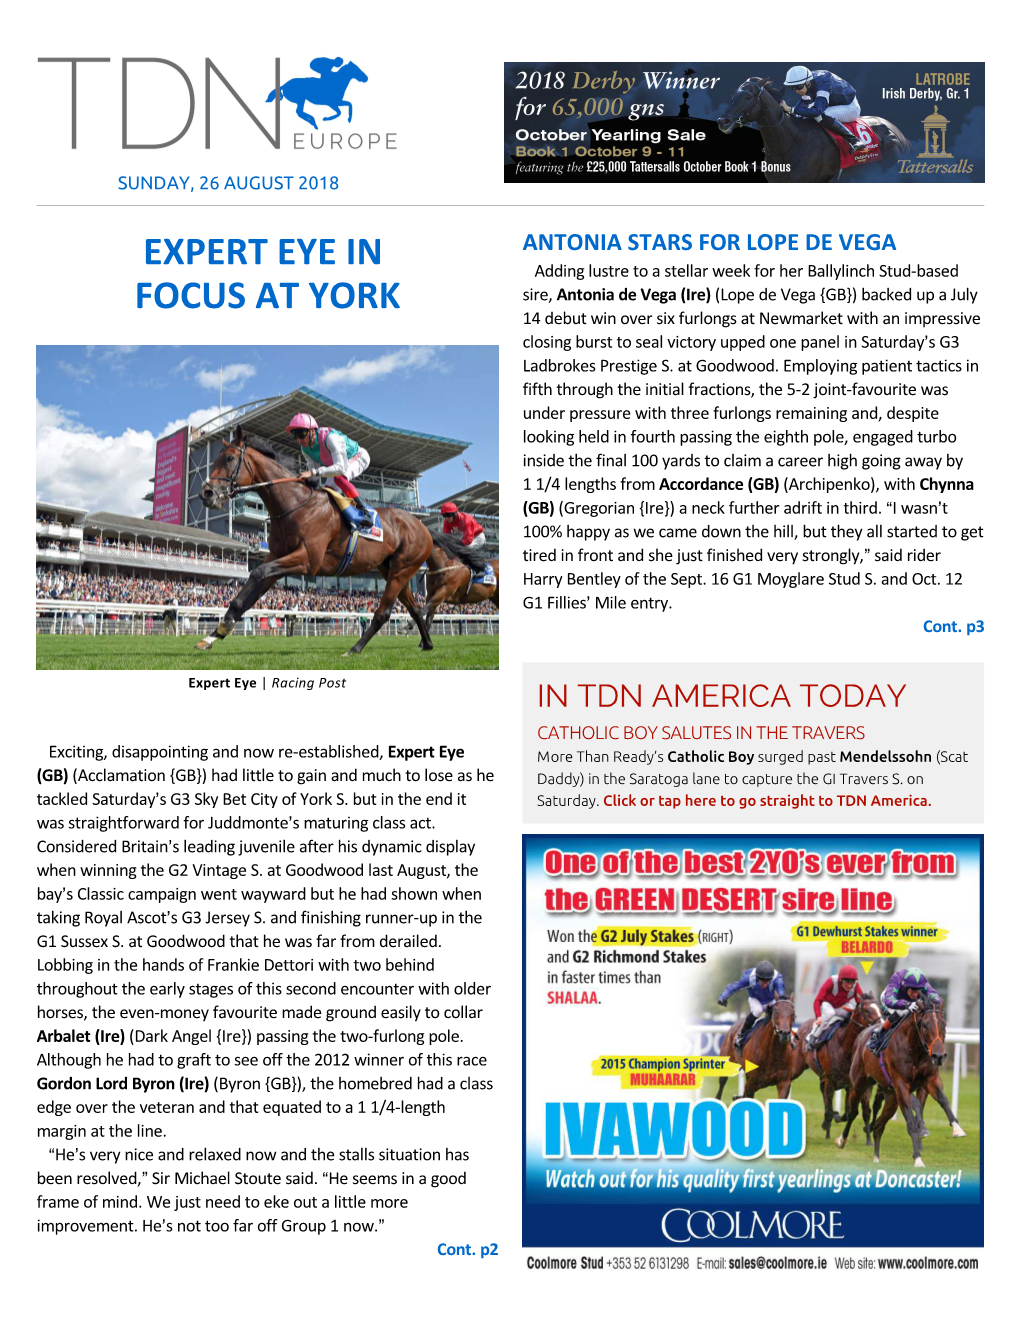 Expert Eye in Focus at York Cont